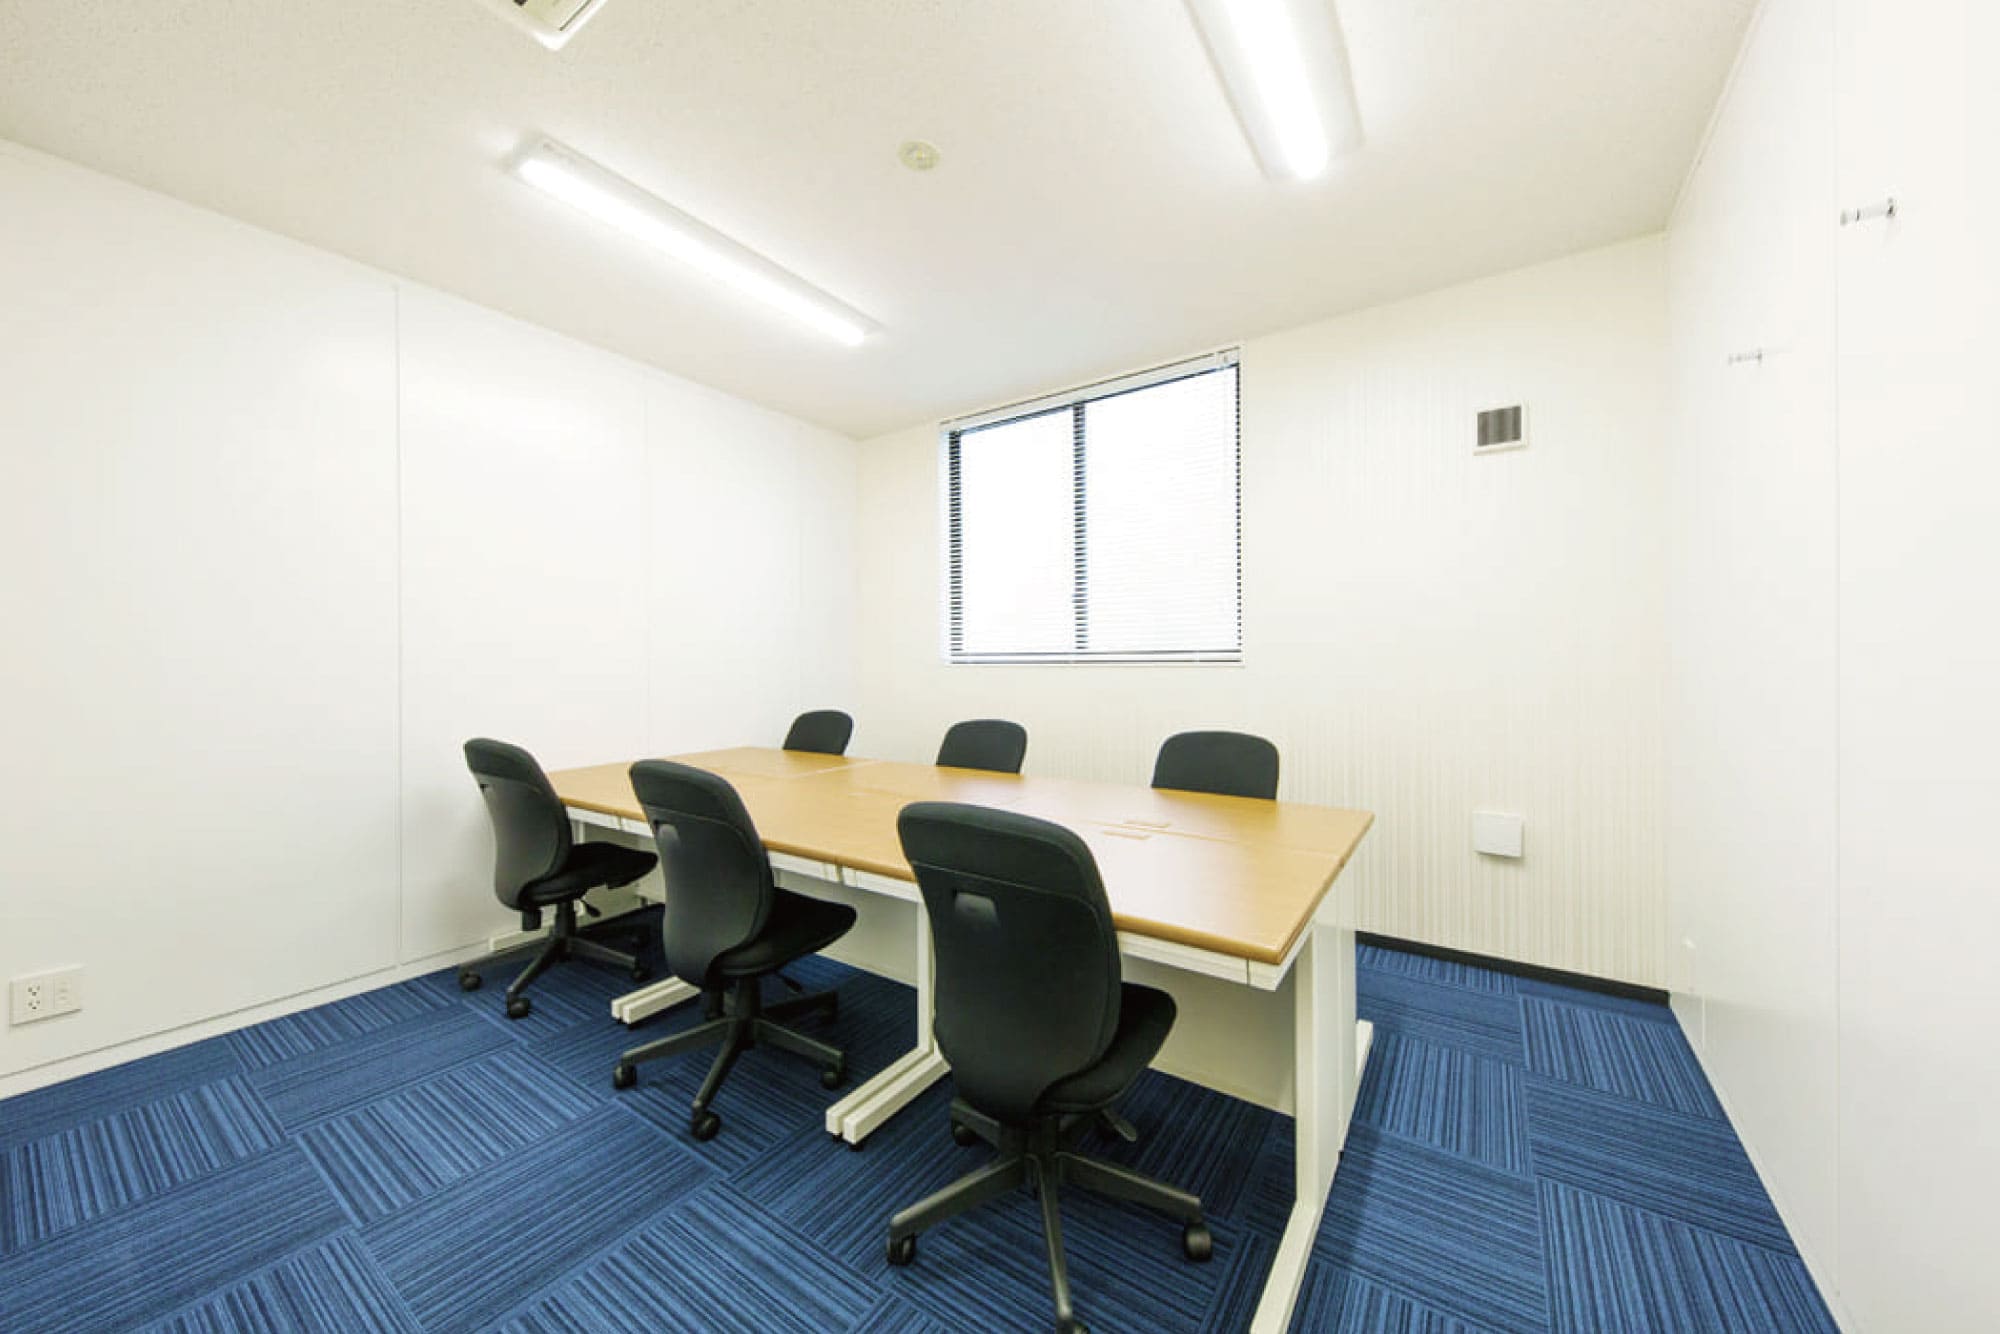 Office space for 6 to 8 person with window - TENSHO OFFICE Ikebukuro Nishiguchi ANNEX